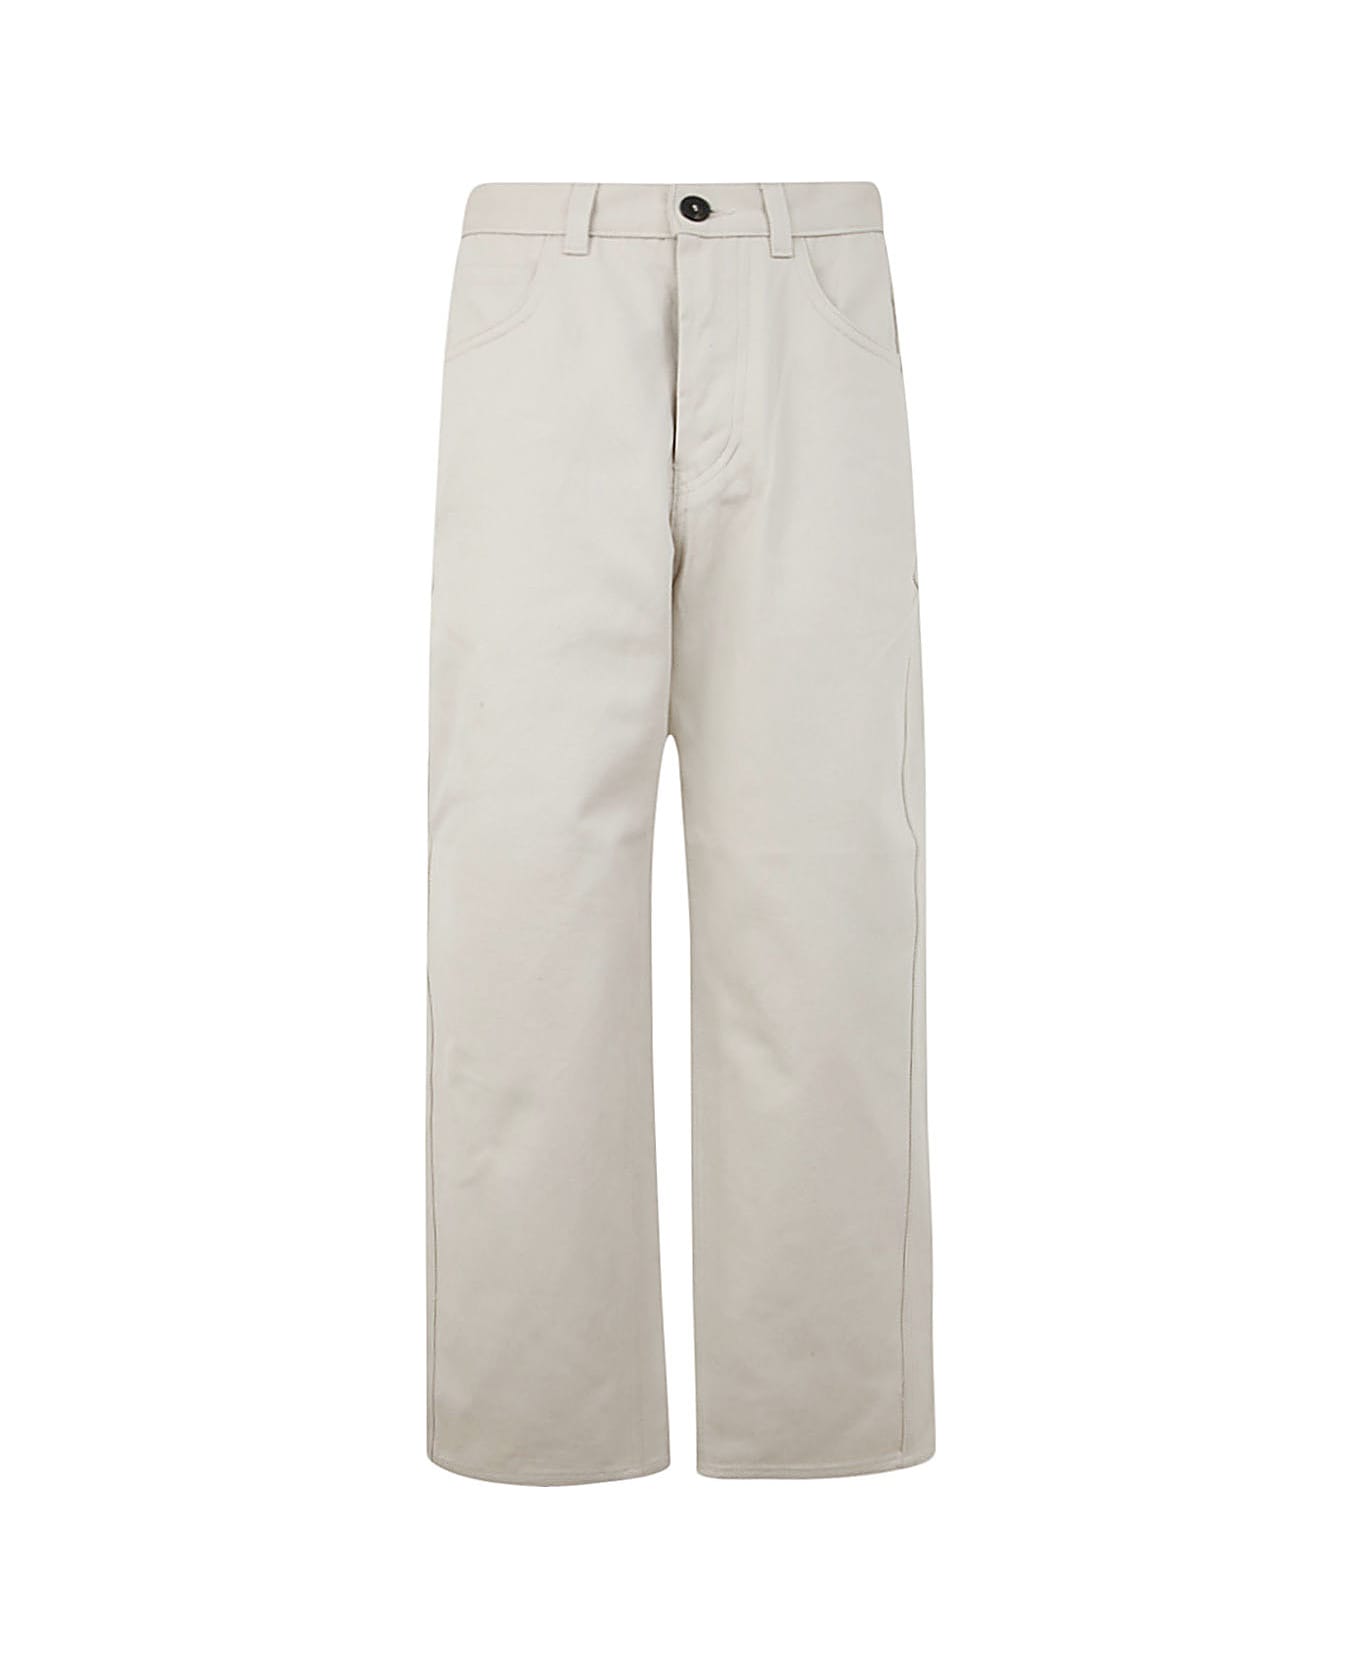 Sofie d'Hoore 5-pockets Jeans - Pearl ボトムス